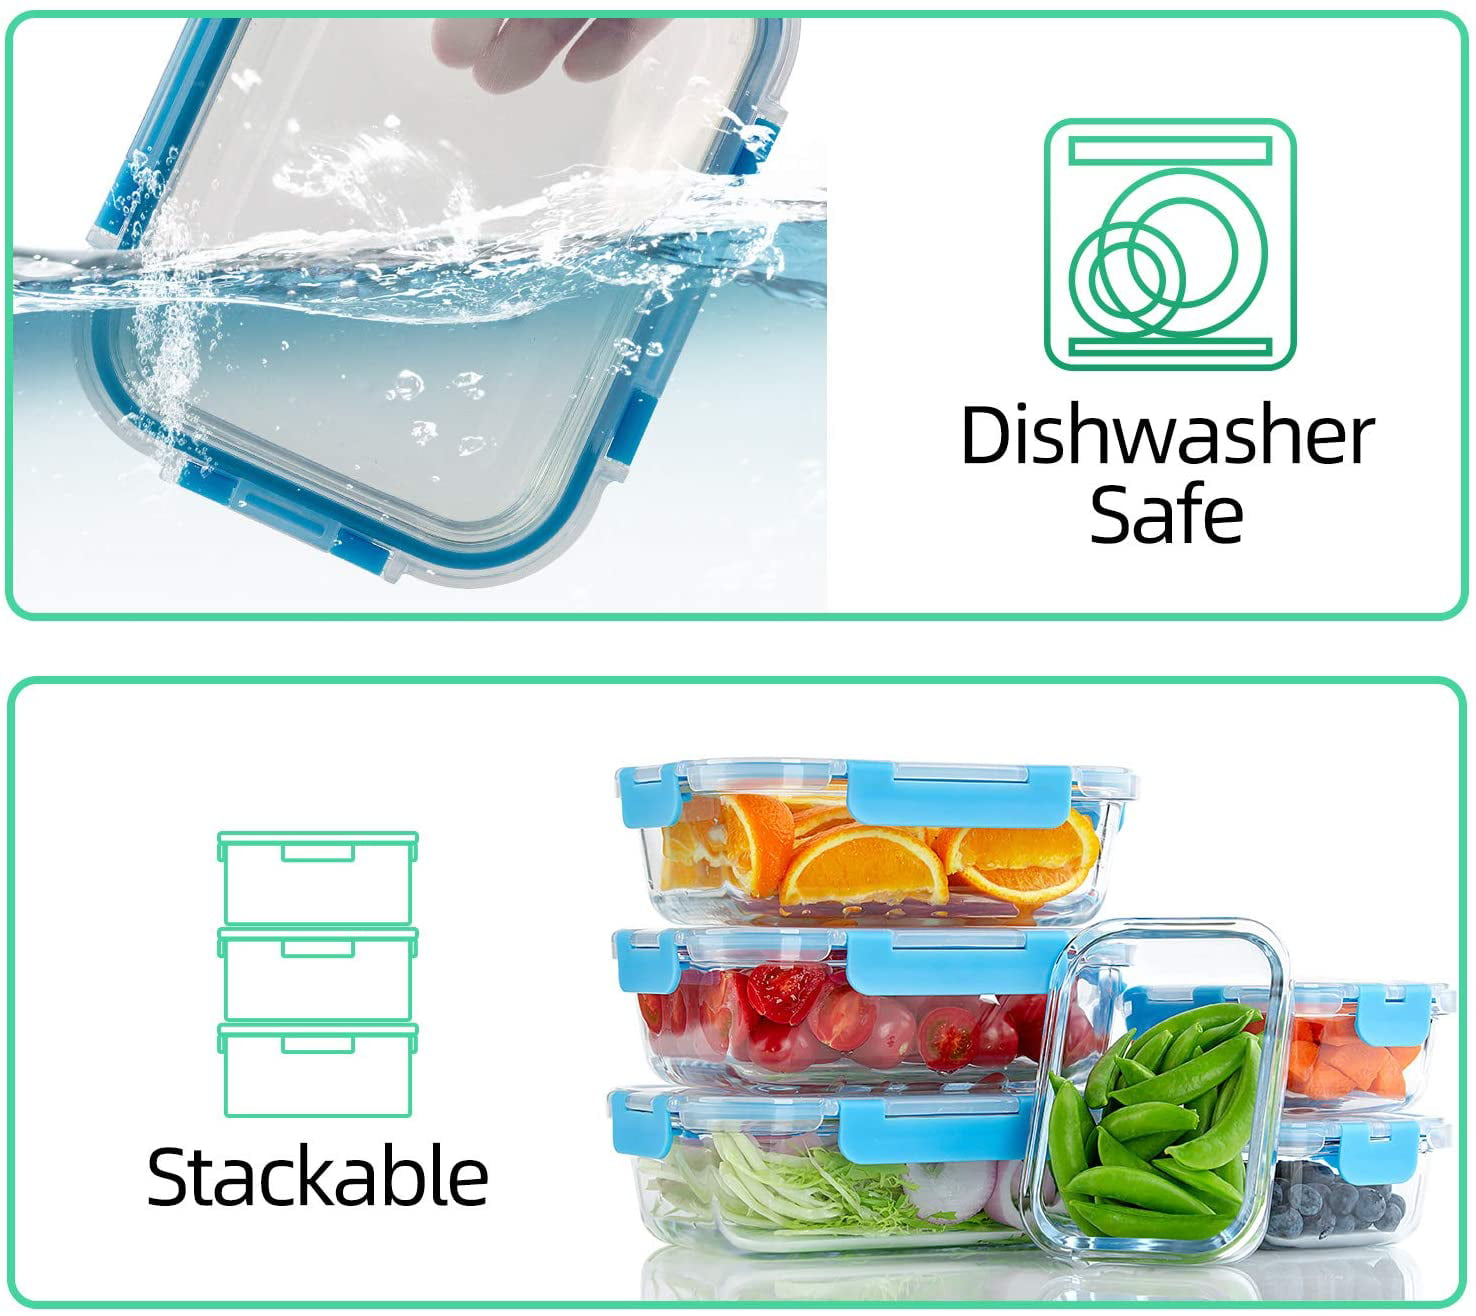 10 Pack Glass Meal Prep Containers 30% OFF - Deals Finders